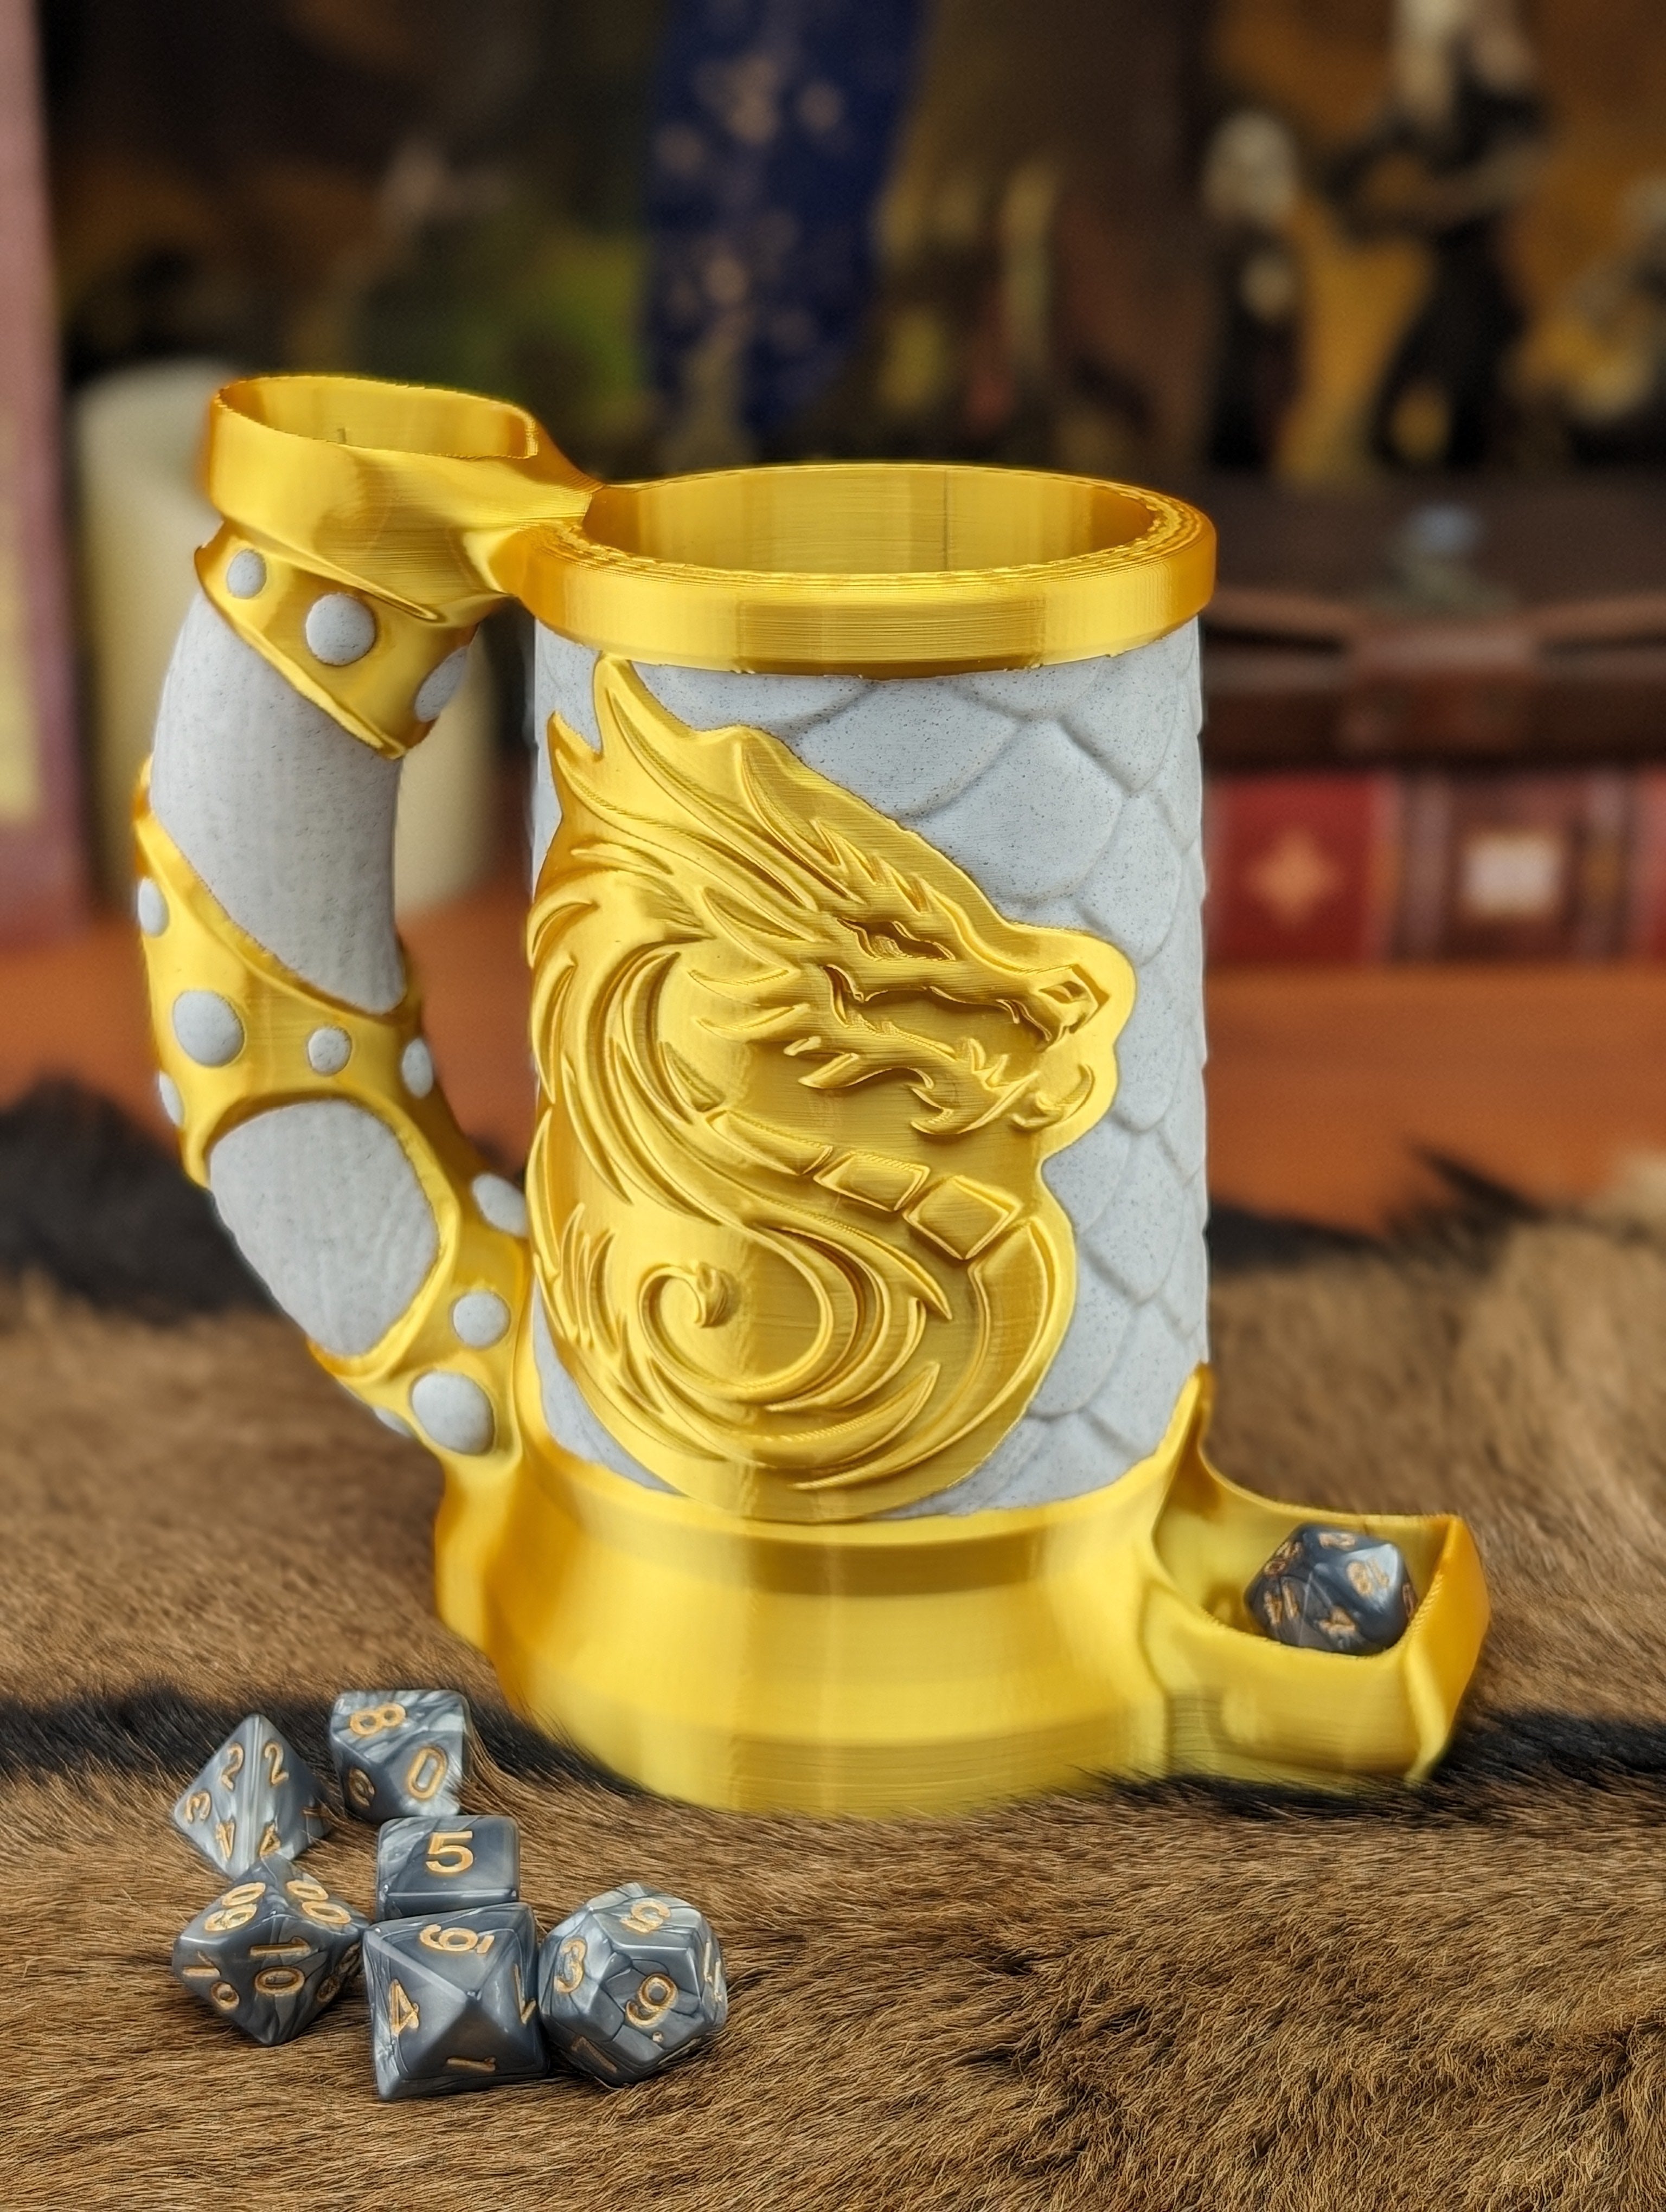 Can Holding Dice Tower Mug - Dragon Crest